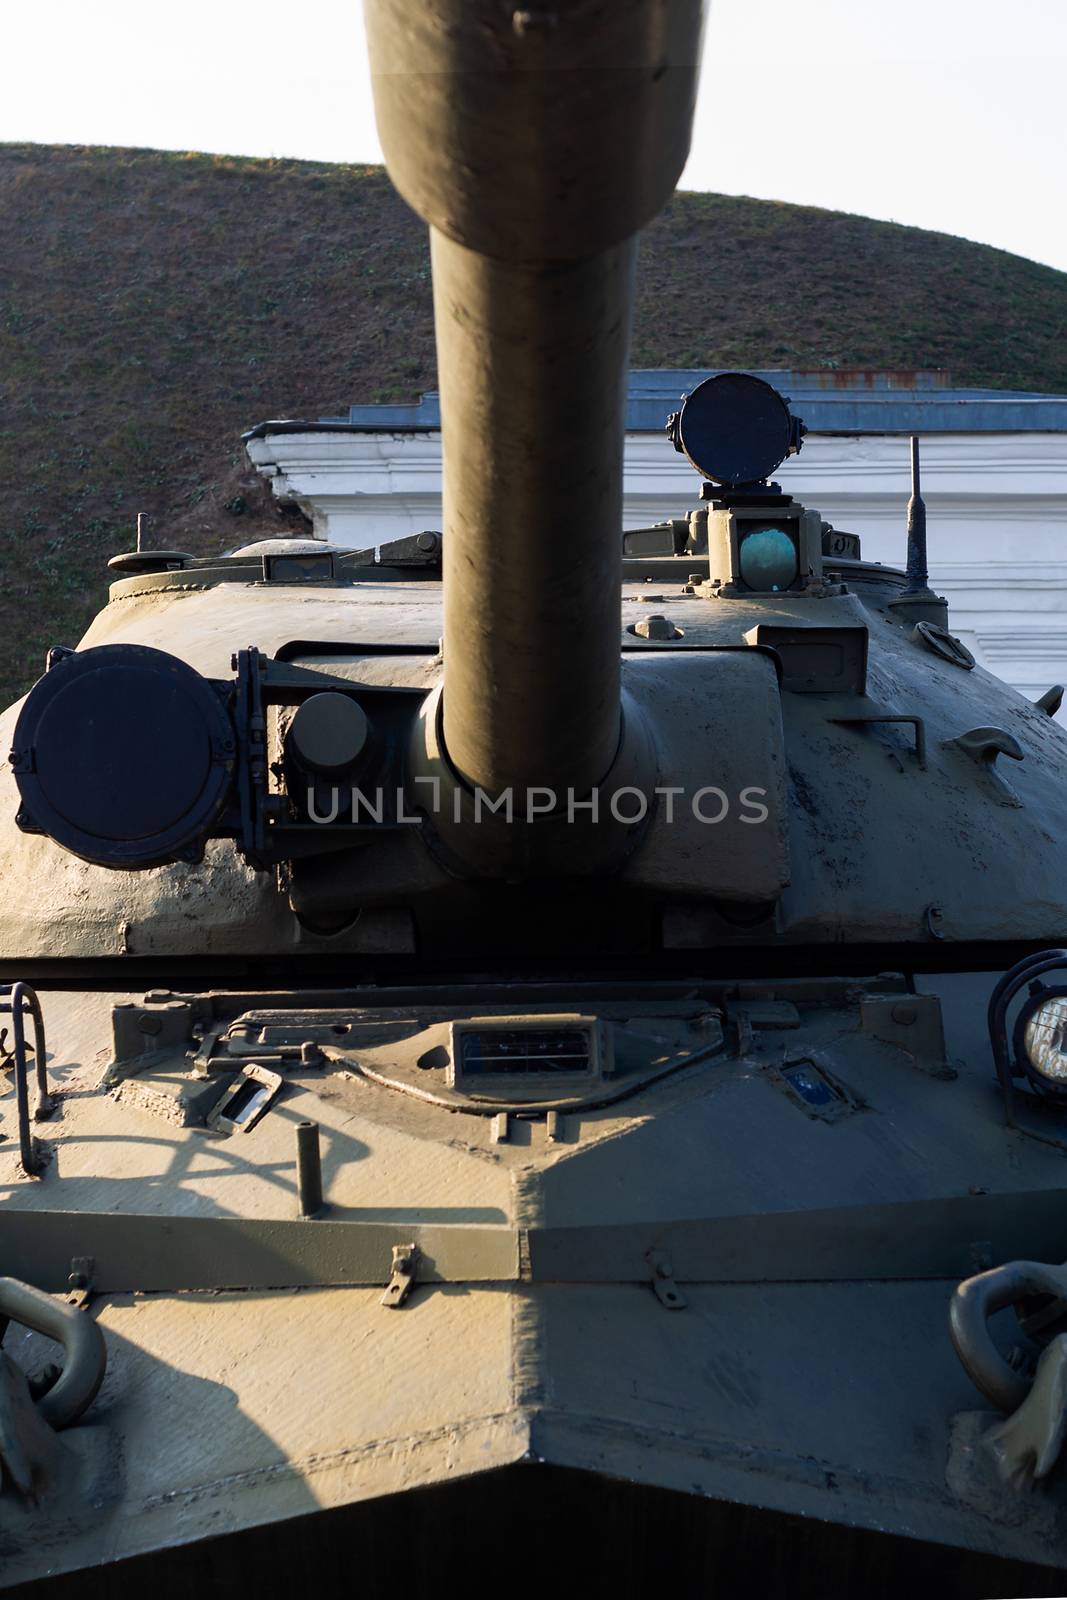 Parts of the hull of the old tank in the museum of military vehicles outdoor in the open air. Gun closeup view.